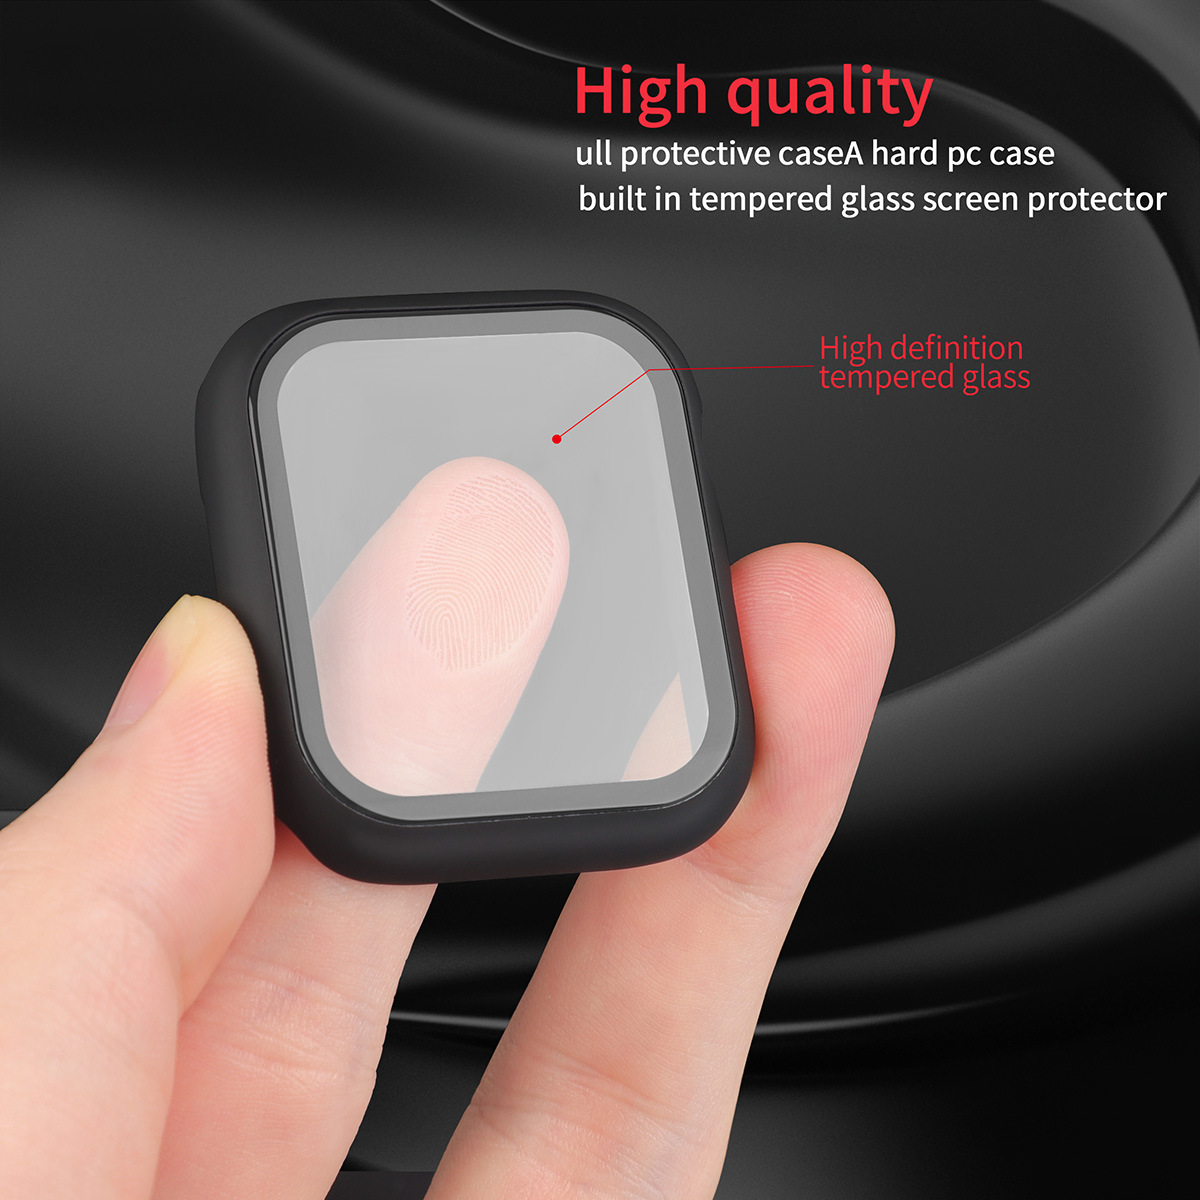 Bakeey-40mm44mm-Tempered-Glass-Screen-Protector--Hard-PC-Bumper-Cover-For-Apple-Watch-Series-6-SESer-1816773-2